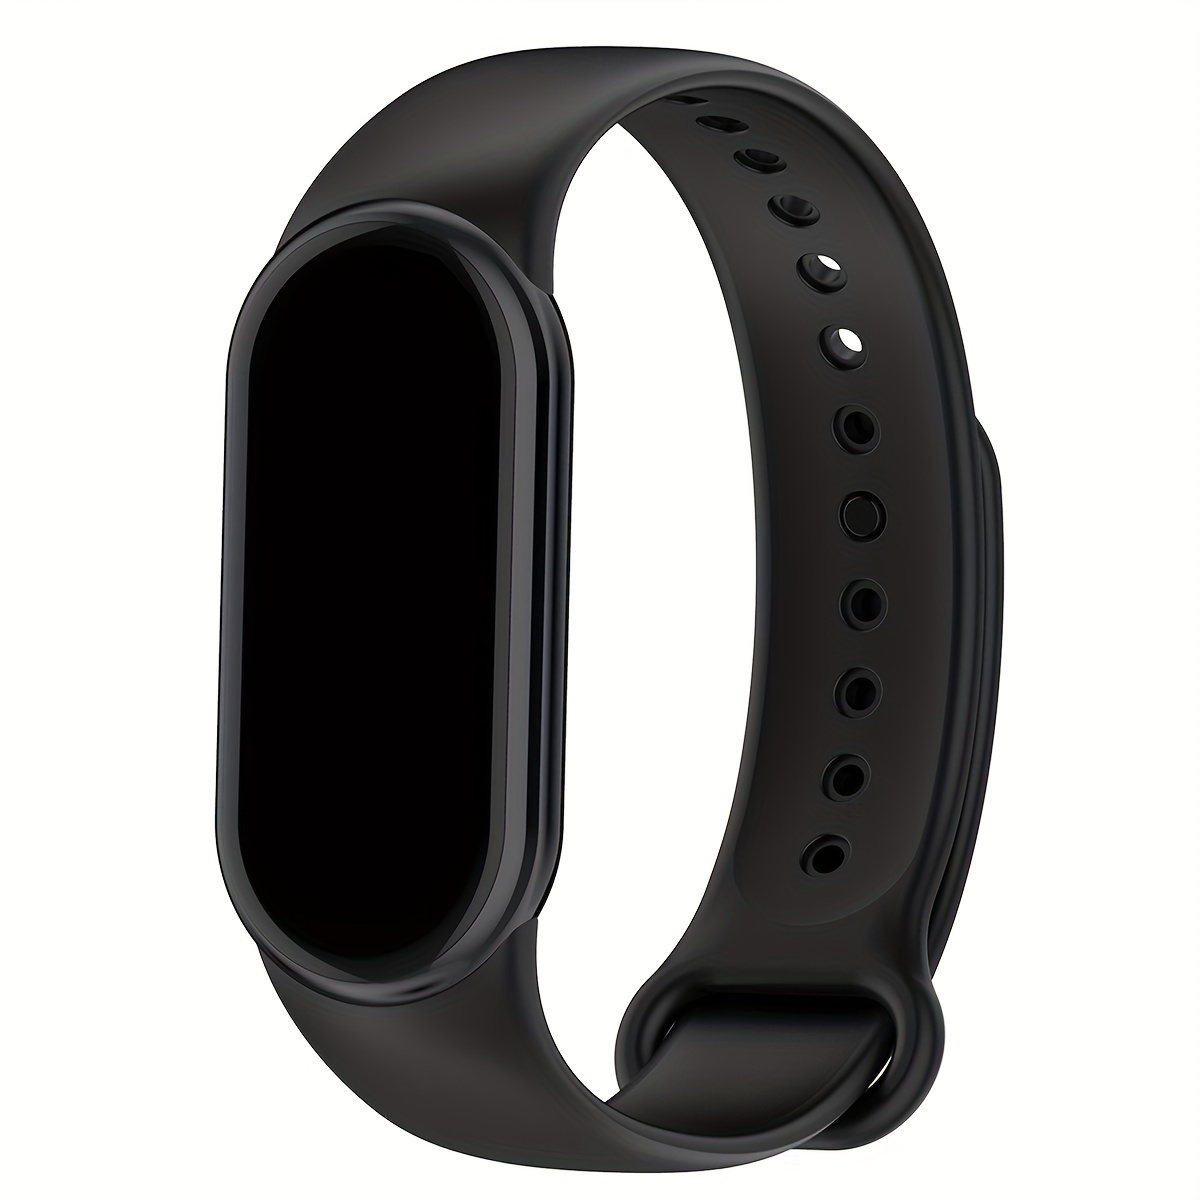 Silicone Strap For Xiaomi Mi Band 8 Correa Sport Bracelet Miband8 NFC Smart  Wristband Pulseira Replacement MiBand 8 Accessories